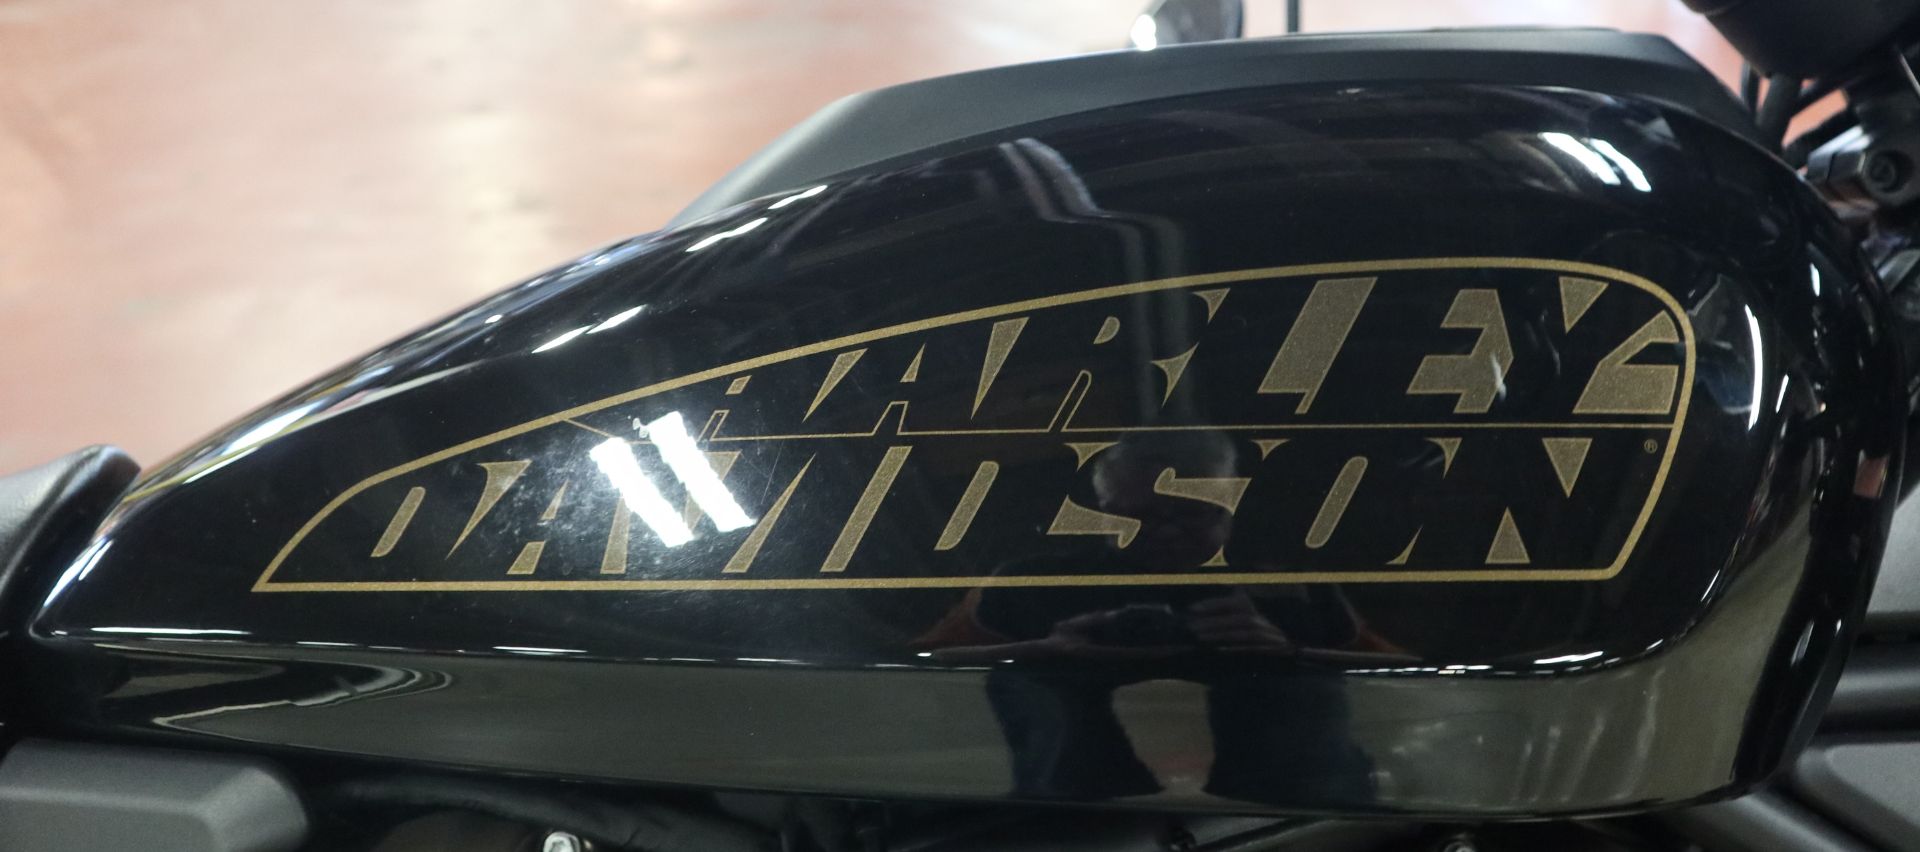 2022 Harley-Davidson Sportster® S in New London, Connecticut - Photo 9